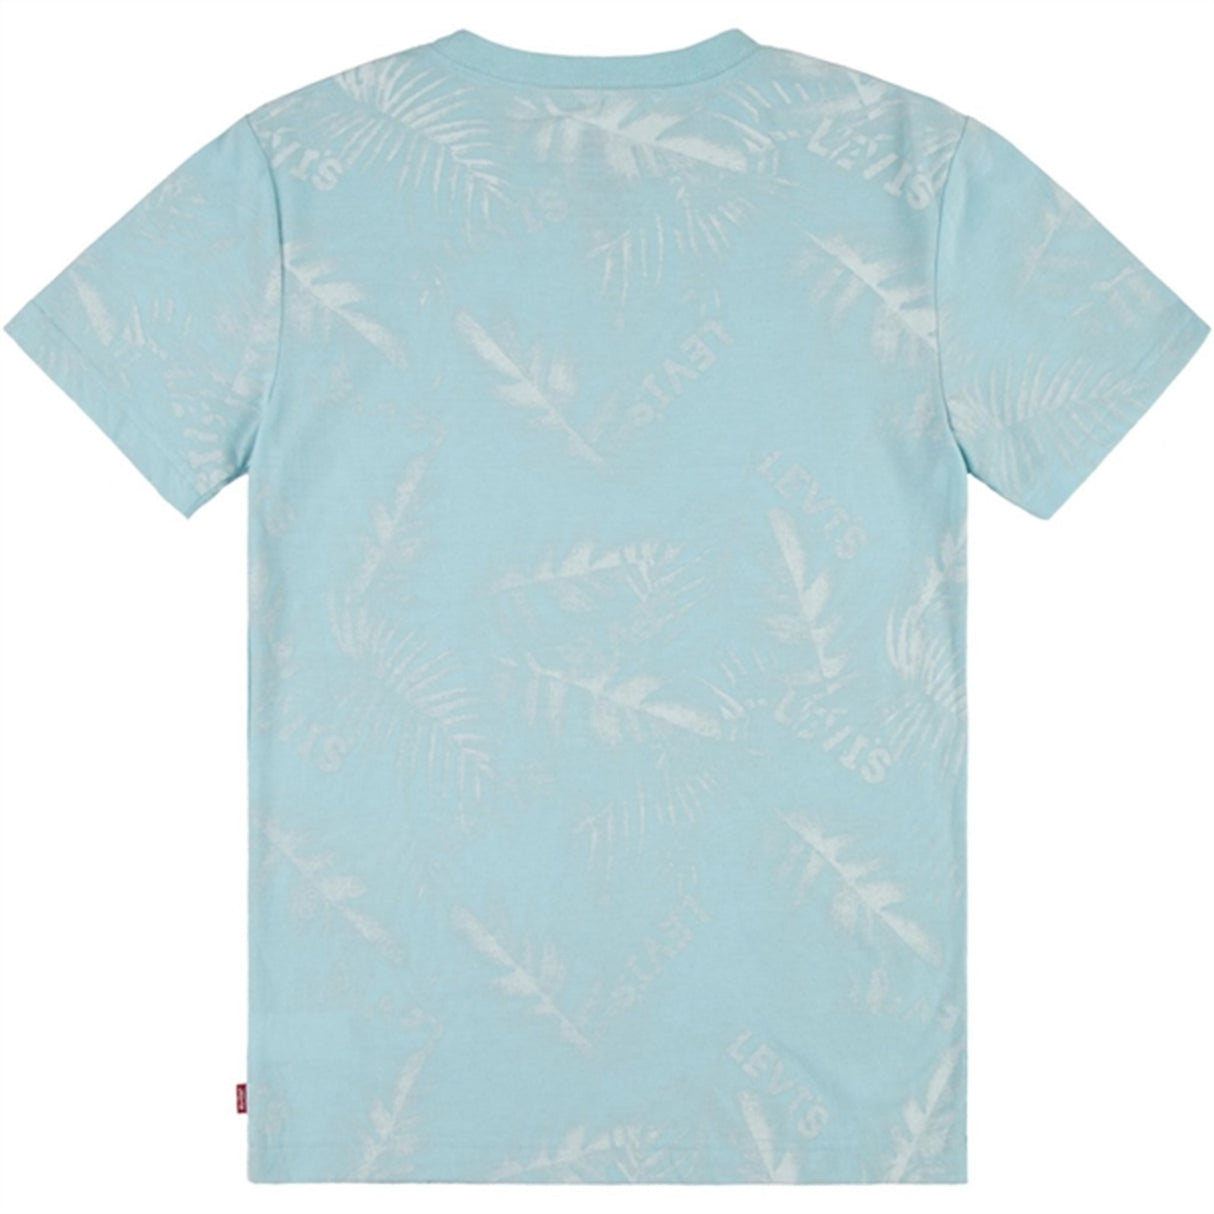 Levi's Barely There Palm T-Shirt Stillwater 4